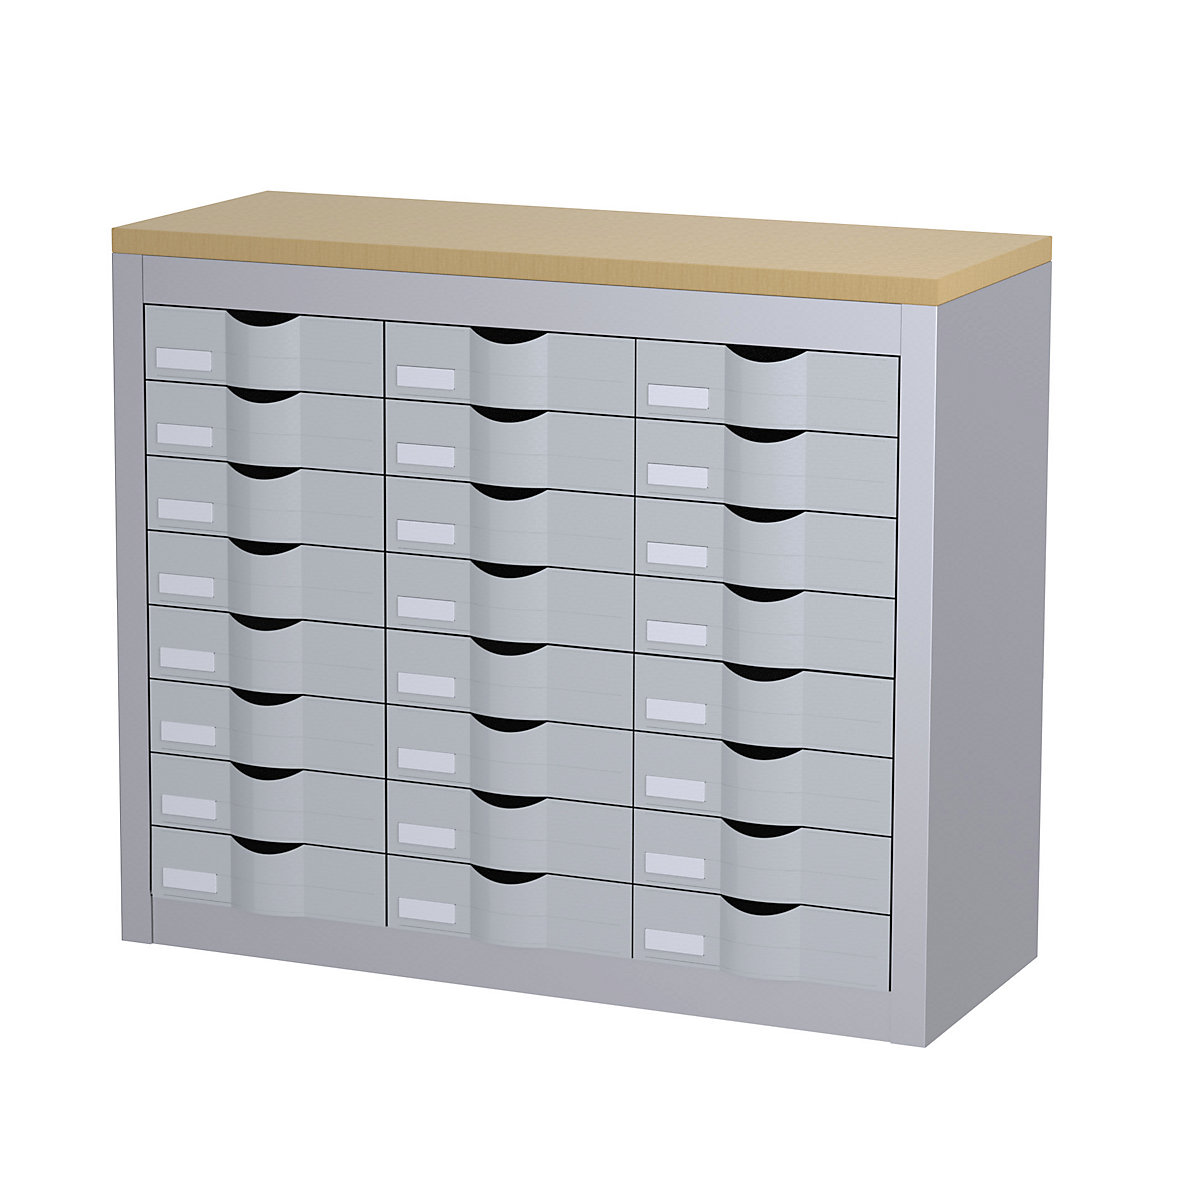 Sorting station, with drawers, 3 rows, 24 drawers, aluminium-2